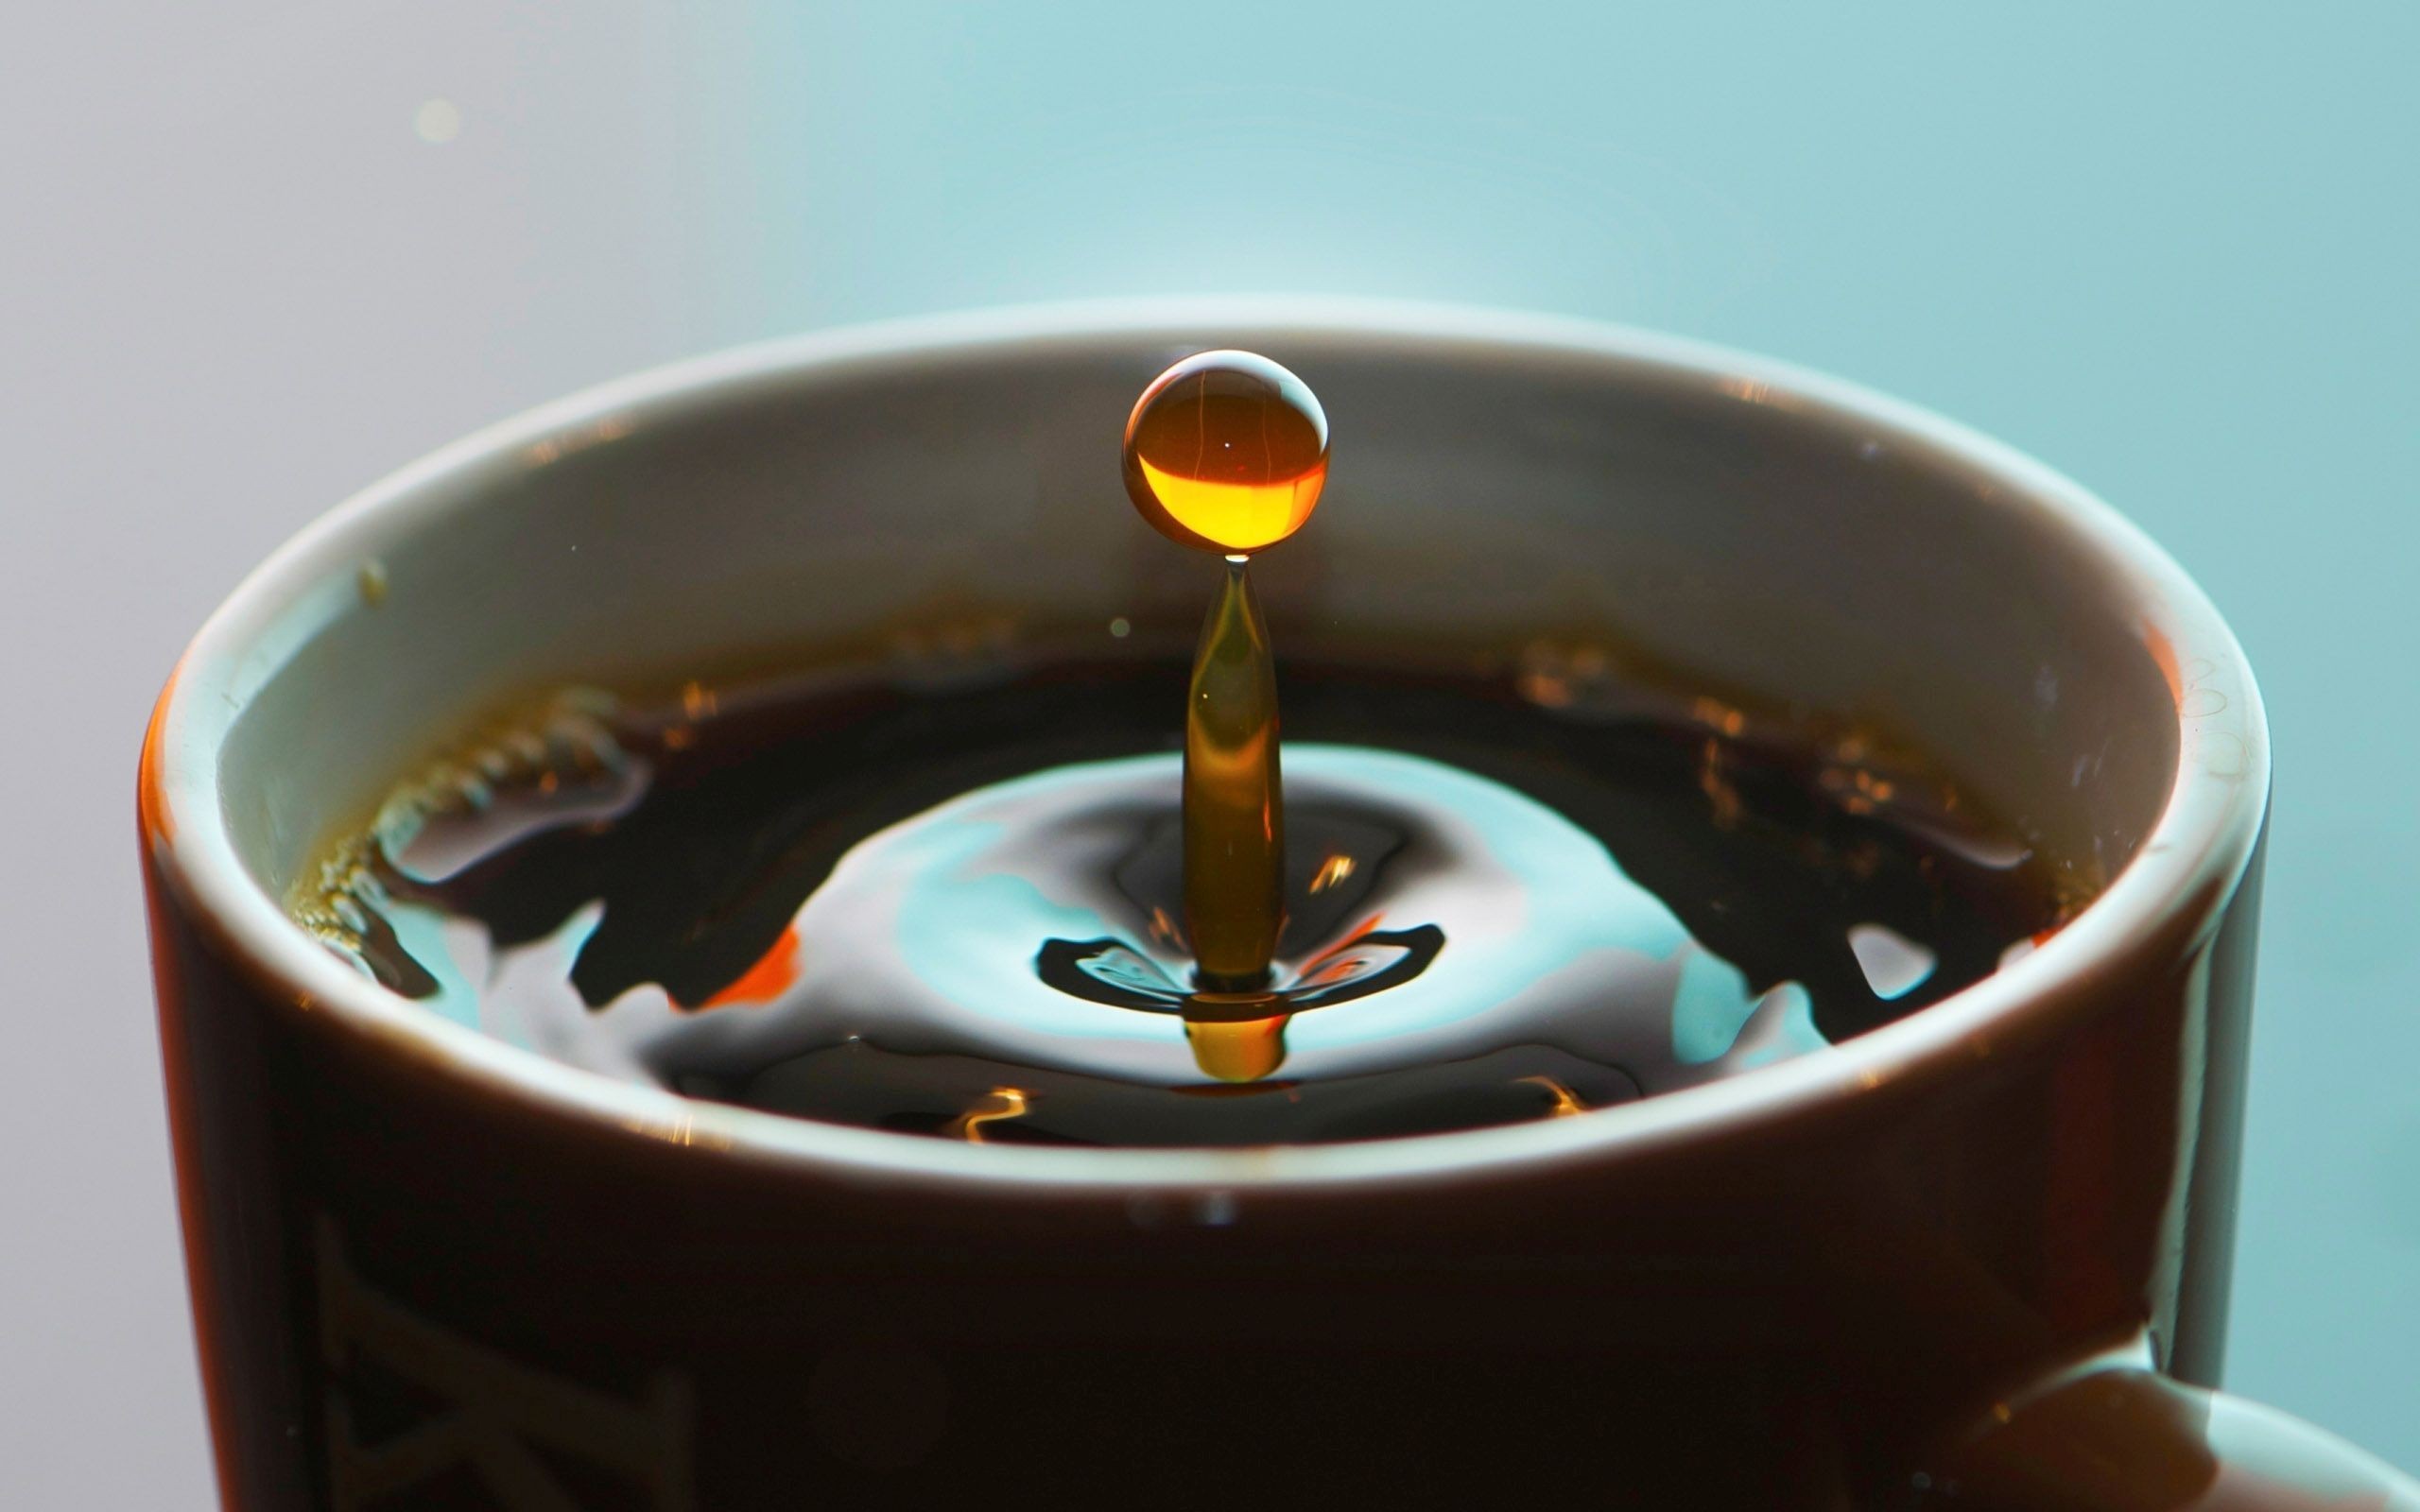 Photography: Drop Coffee Full HD Wallpaper 2560x1600 for HD 16:9 ...